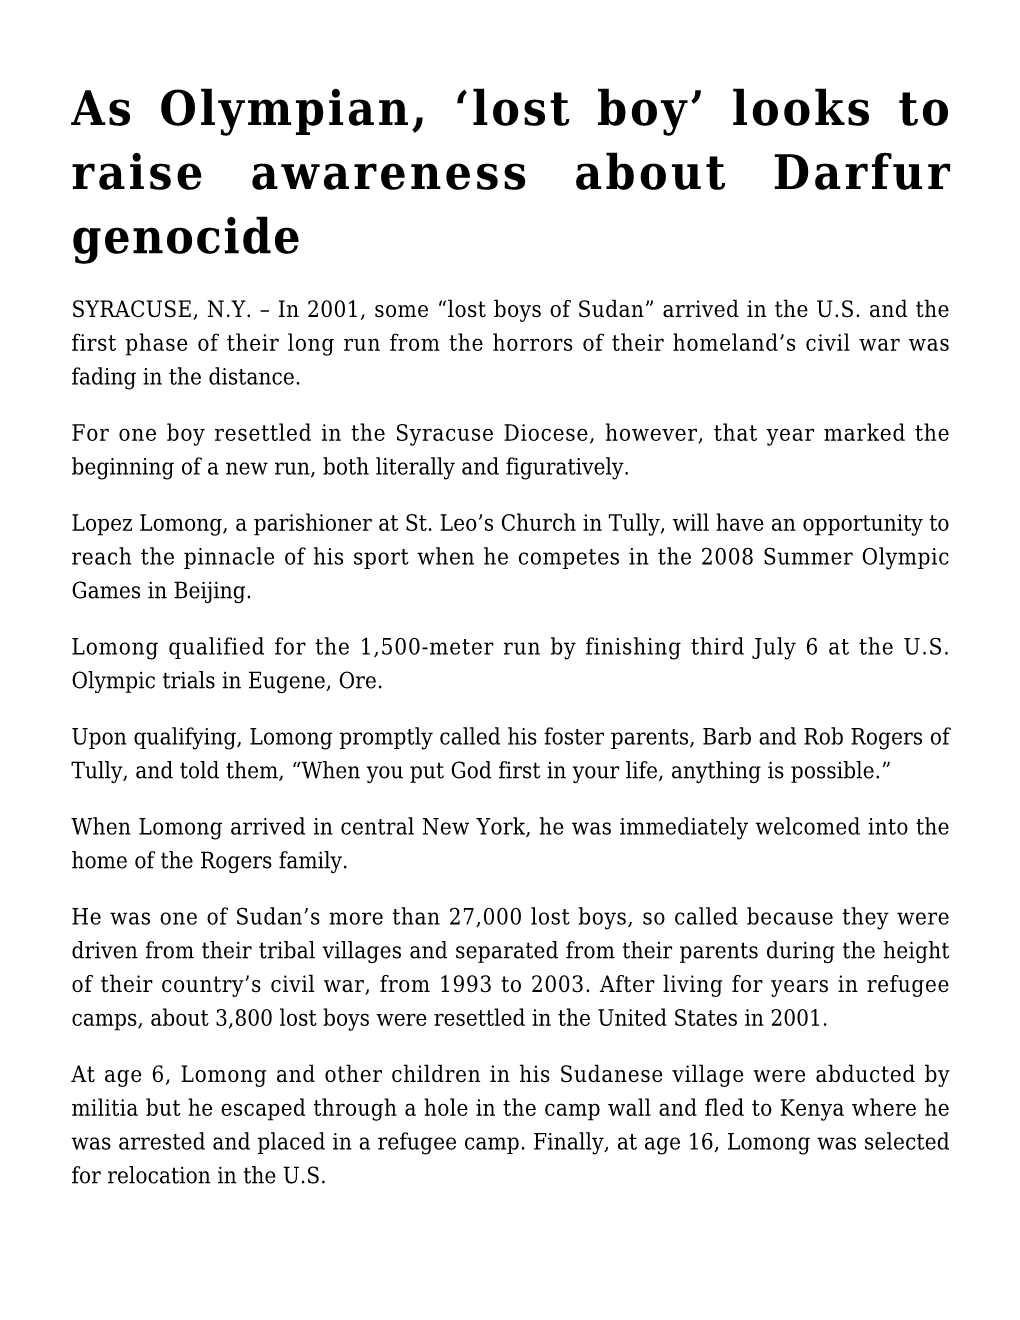 As Olympian, 'Lost Boy' Looks to Raise Awareness About Darfur Genocide